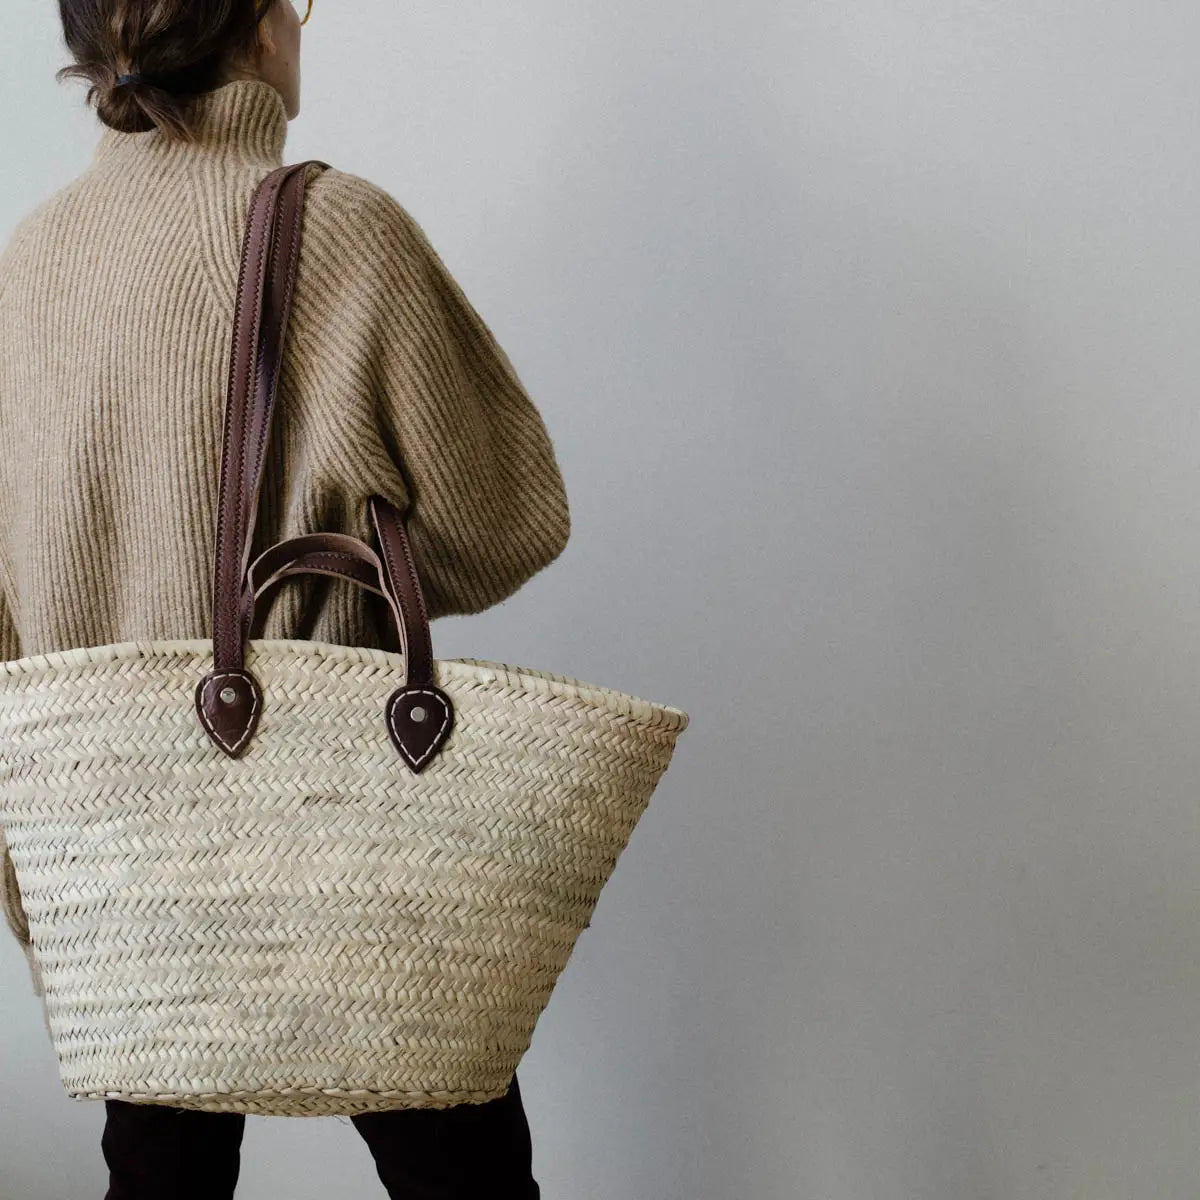 Straw Bag Handmade with Leather - French Market Bag